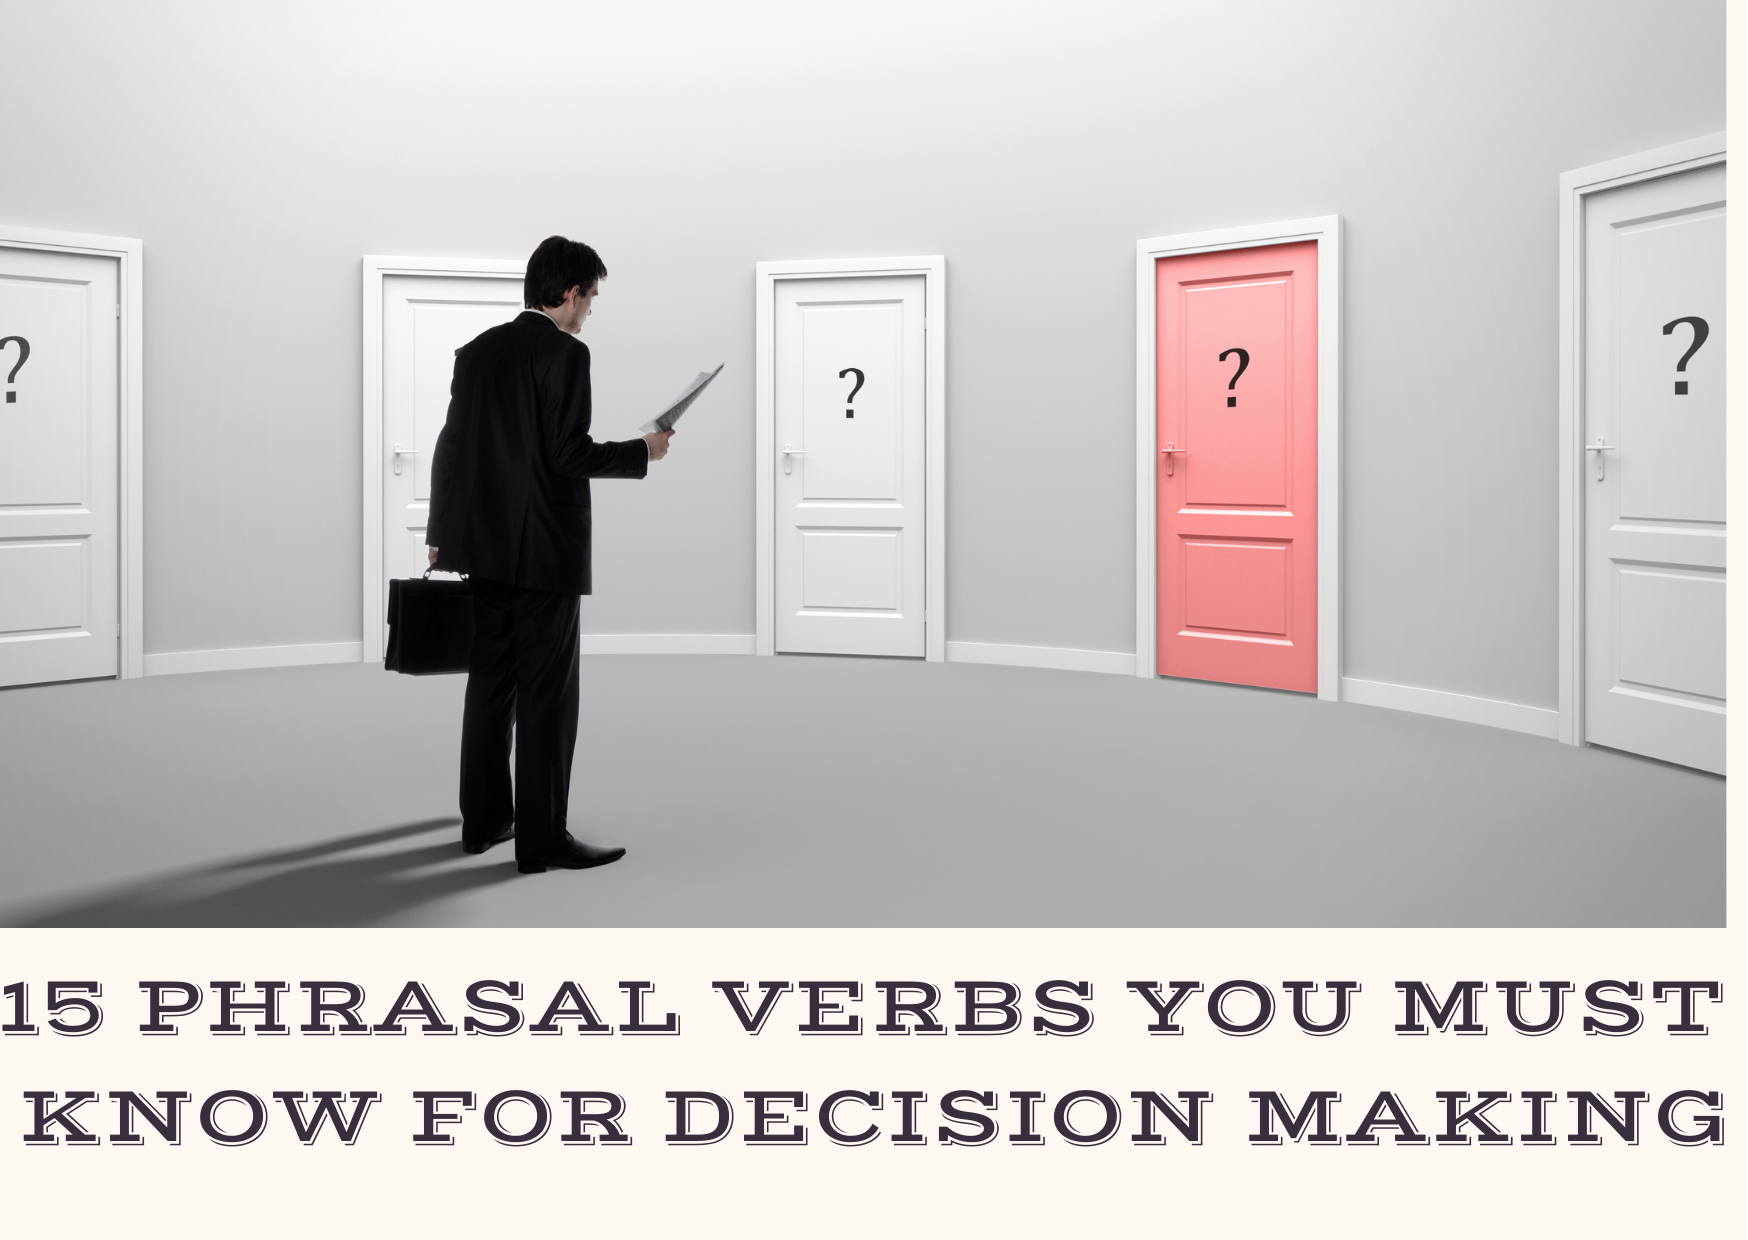 PHRASAL VERBS YOU MUST KNOW